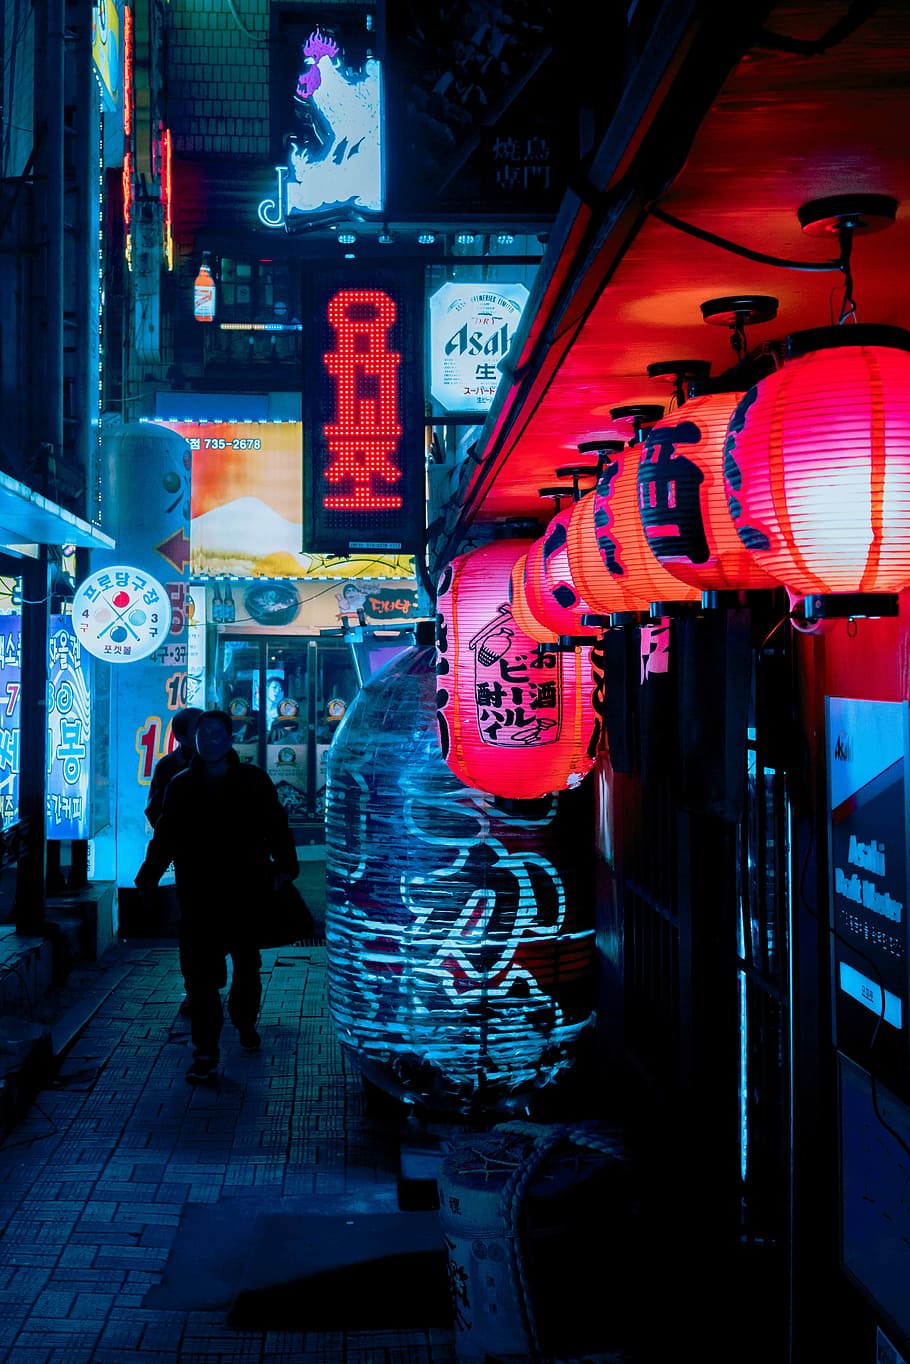 Seoul, silhouette of person walking in hallway street with neon signs, HD wallpaper